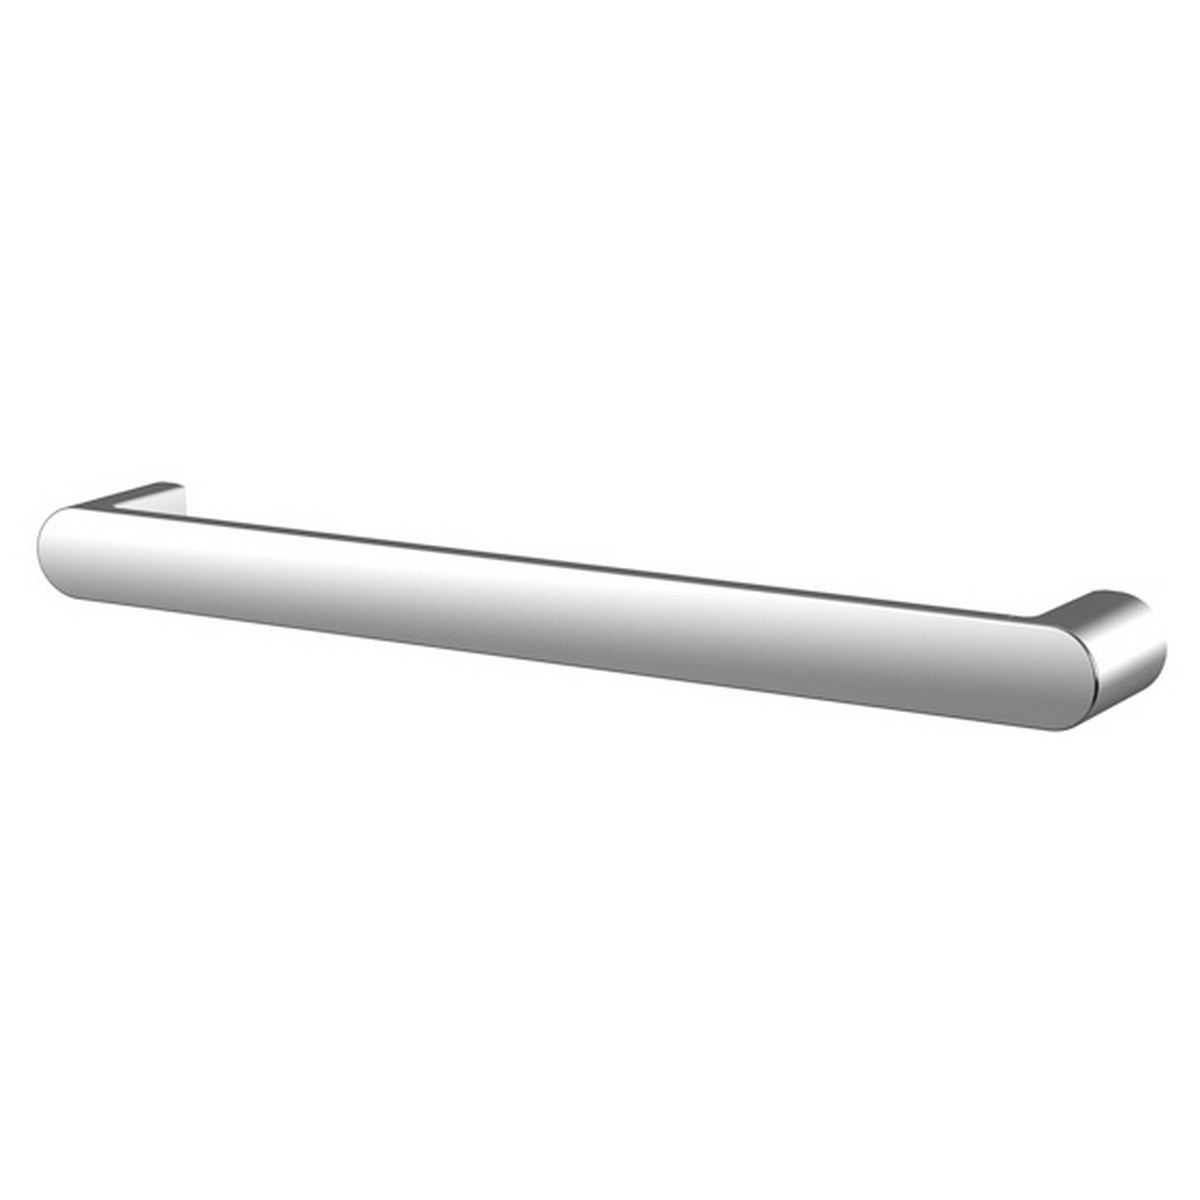 KEUCO 31601010500 ELEGANCE 20 3/4 INCH WALL MOUNTED SUPPORT RAIL IN POLISHED CHROME